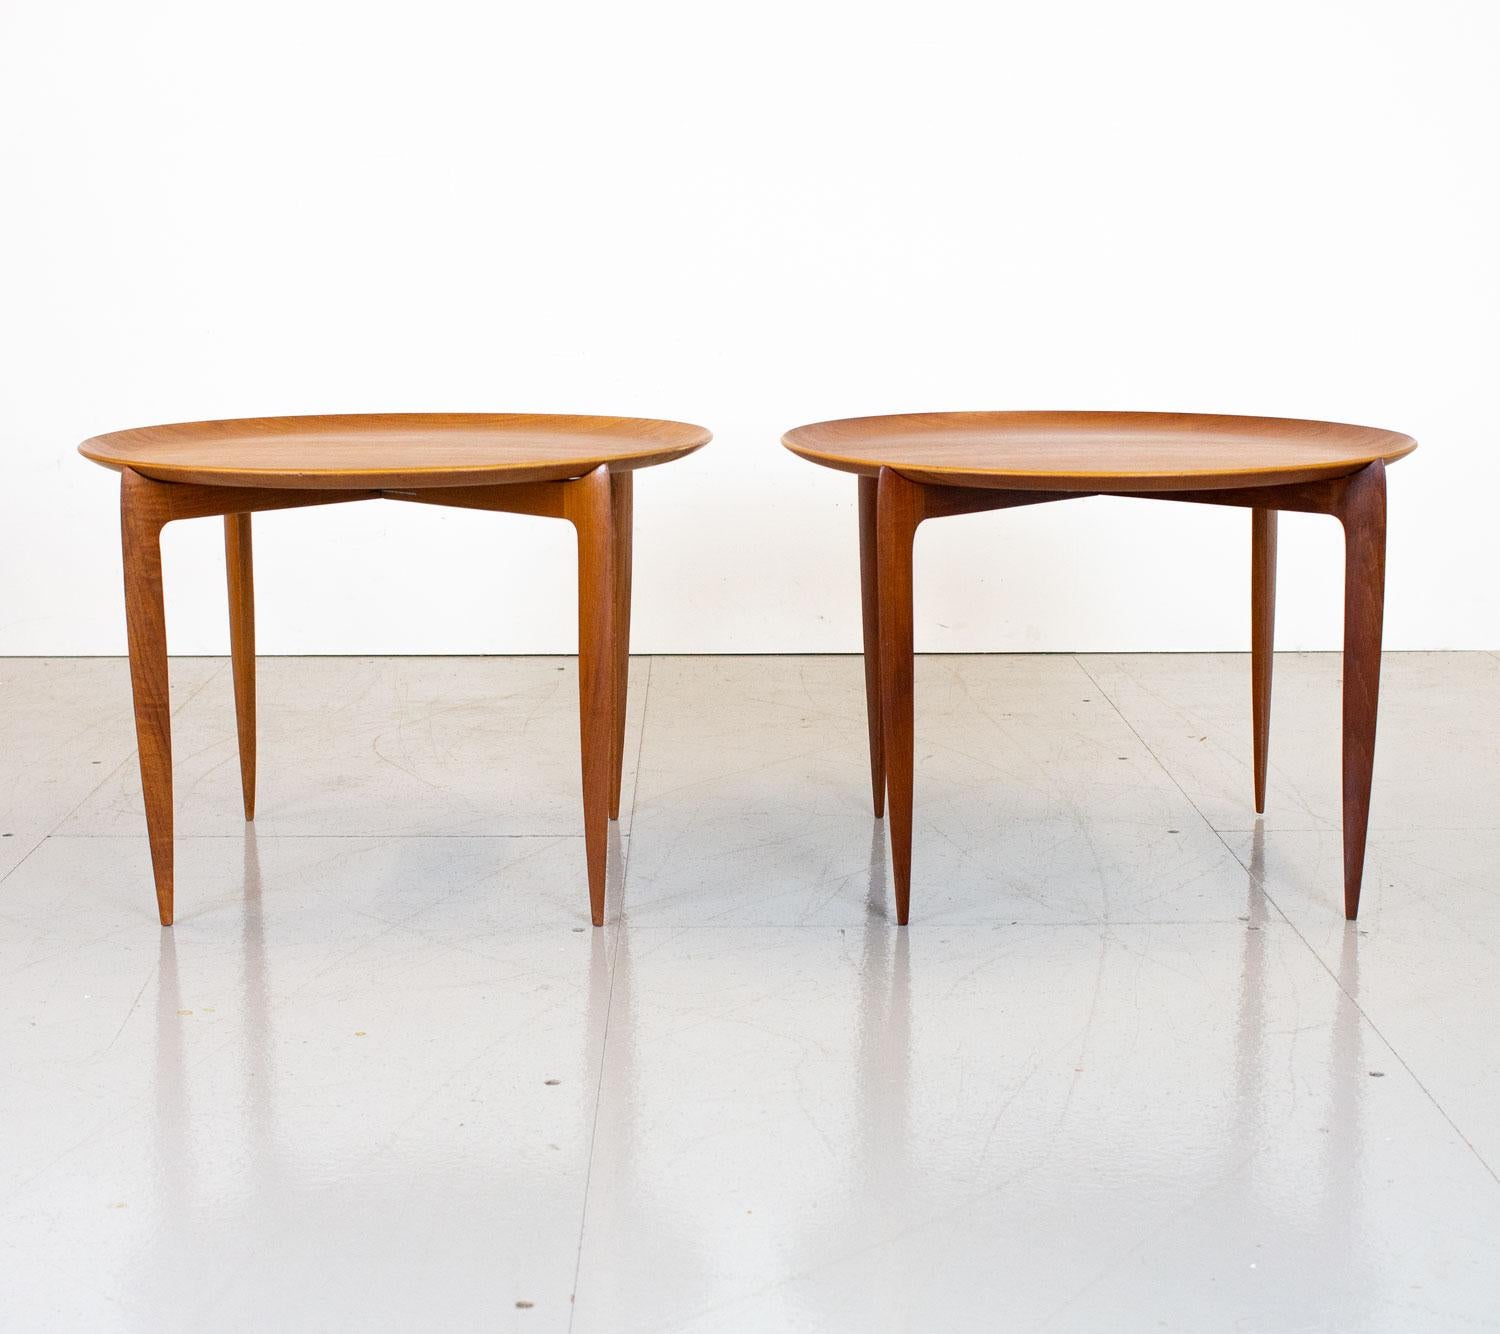 Pair of Danish Teak Model 4508 Tray Tables by Fritz Hansen, 1950s In Good Condition For Sale In Southampton, GB